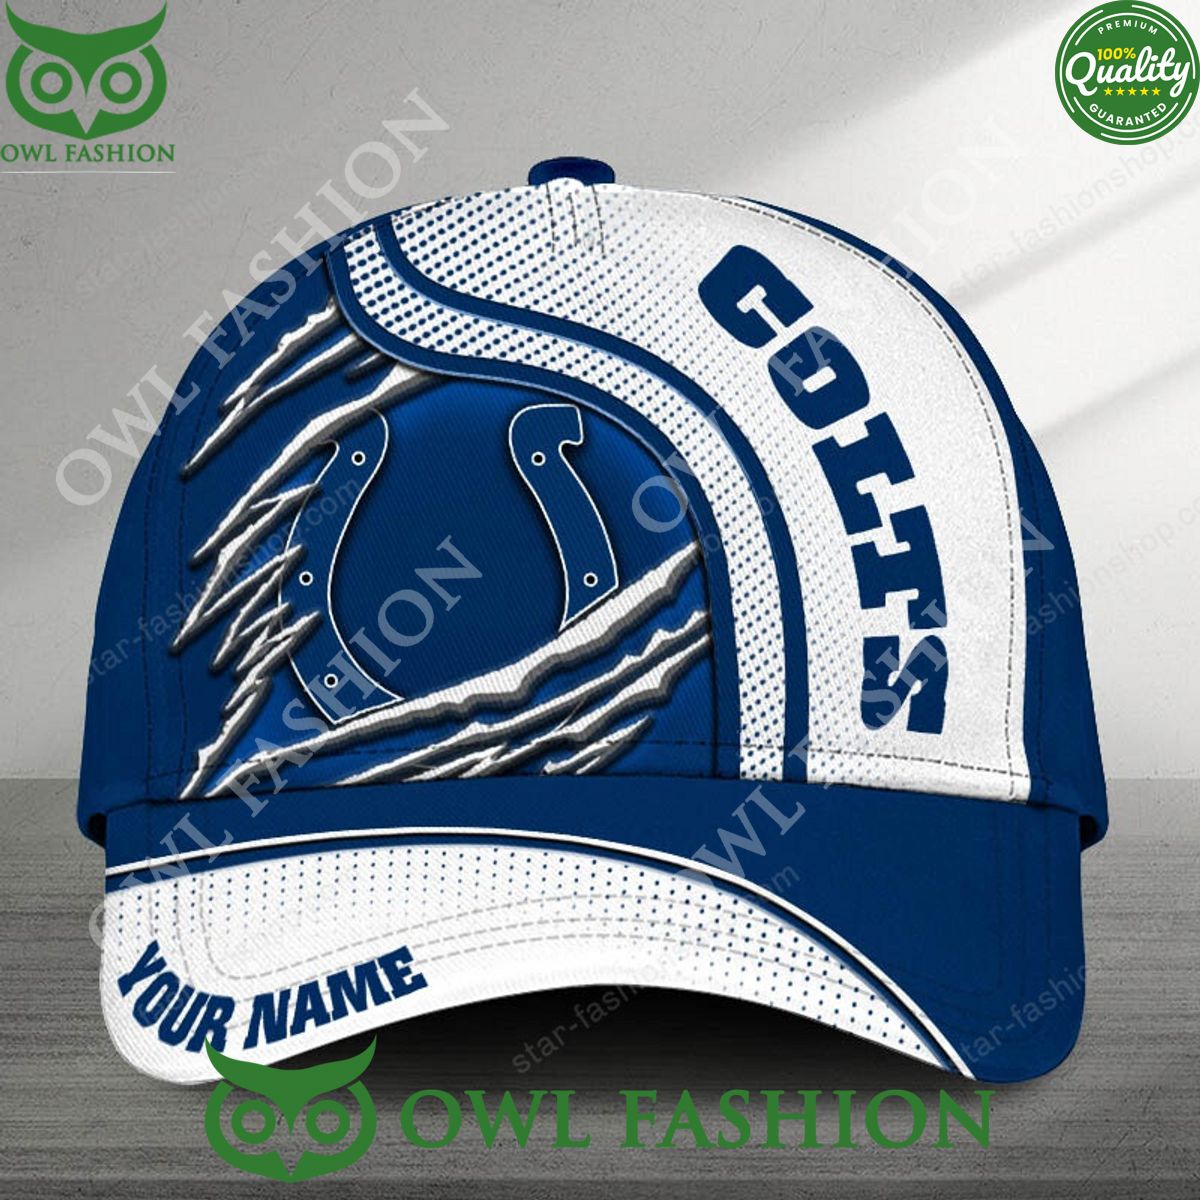 indianapolis colts customized nfl printed cap 1 OI6q1.jpg